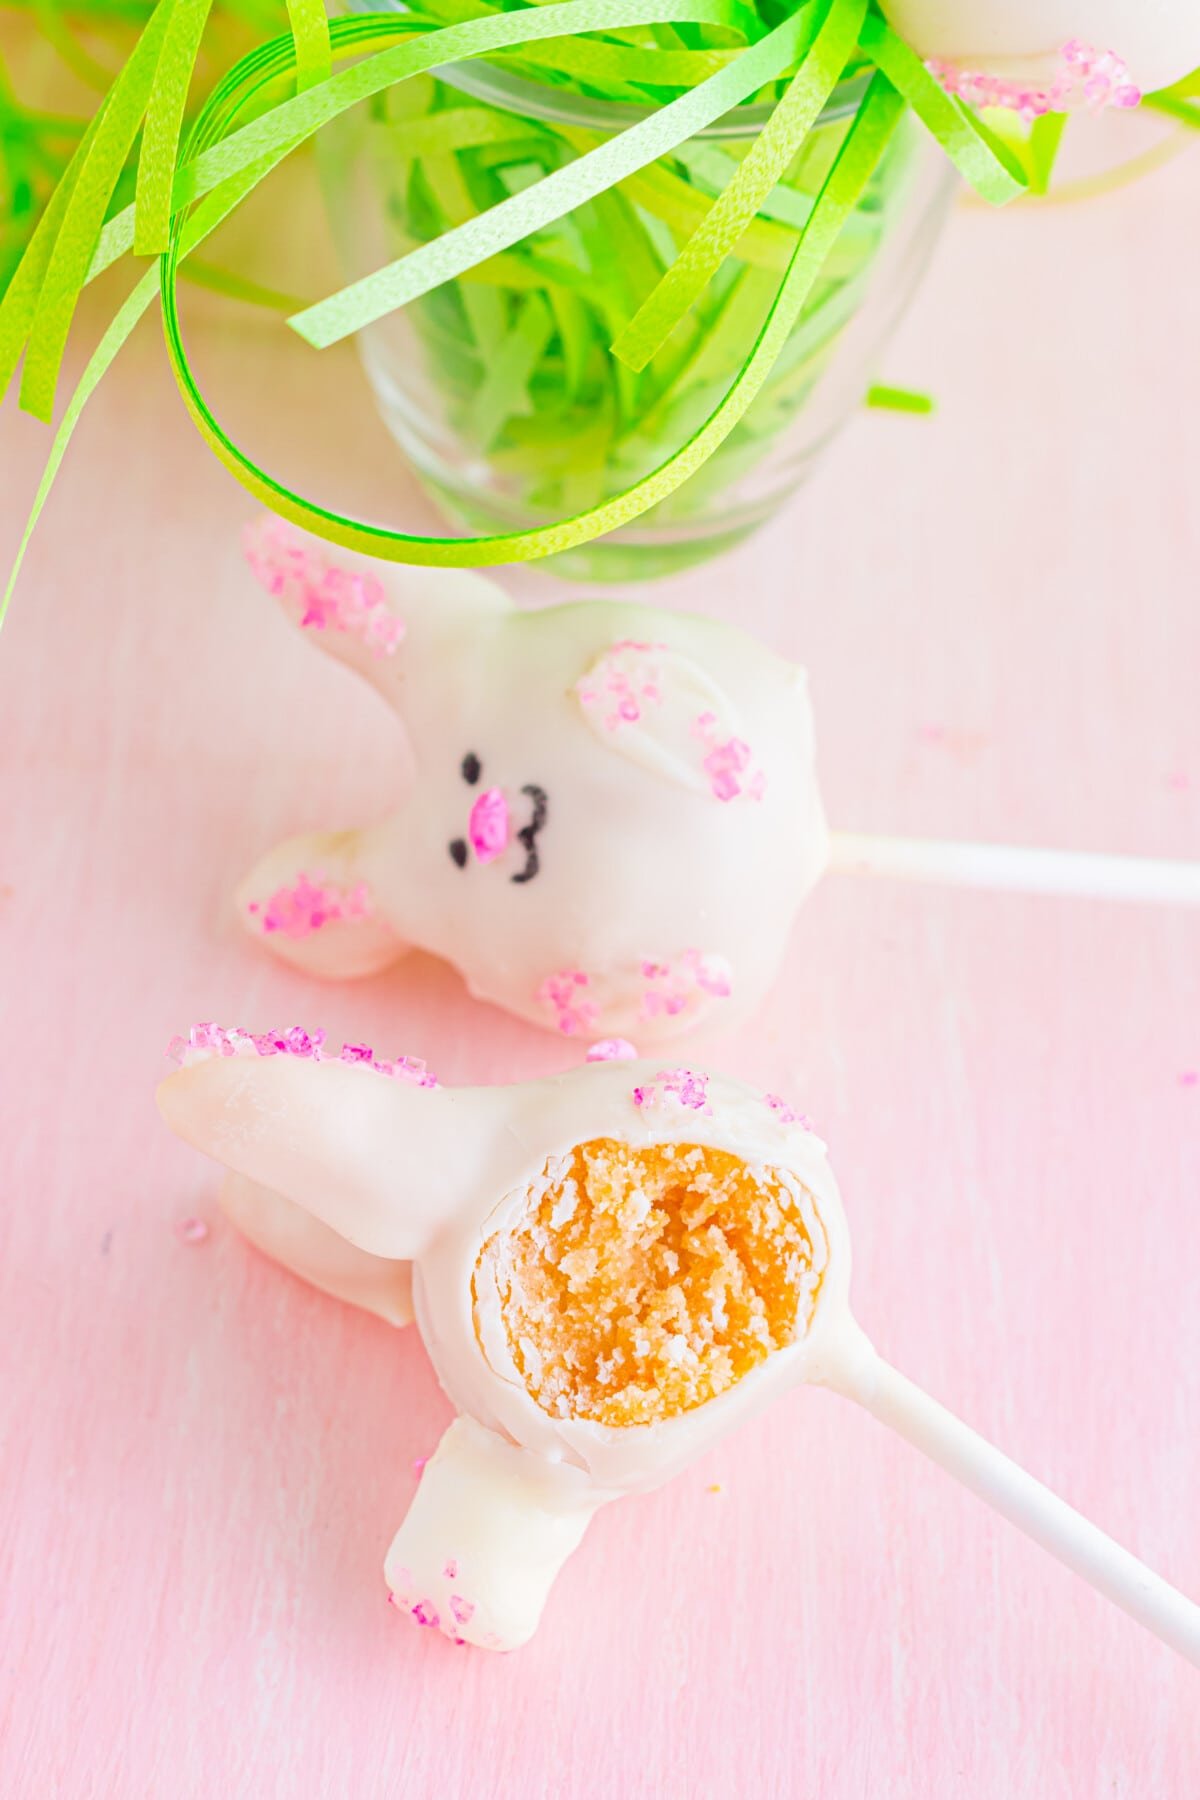 Easter Cake Pops cut in half to reveal the inside.